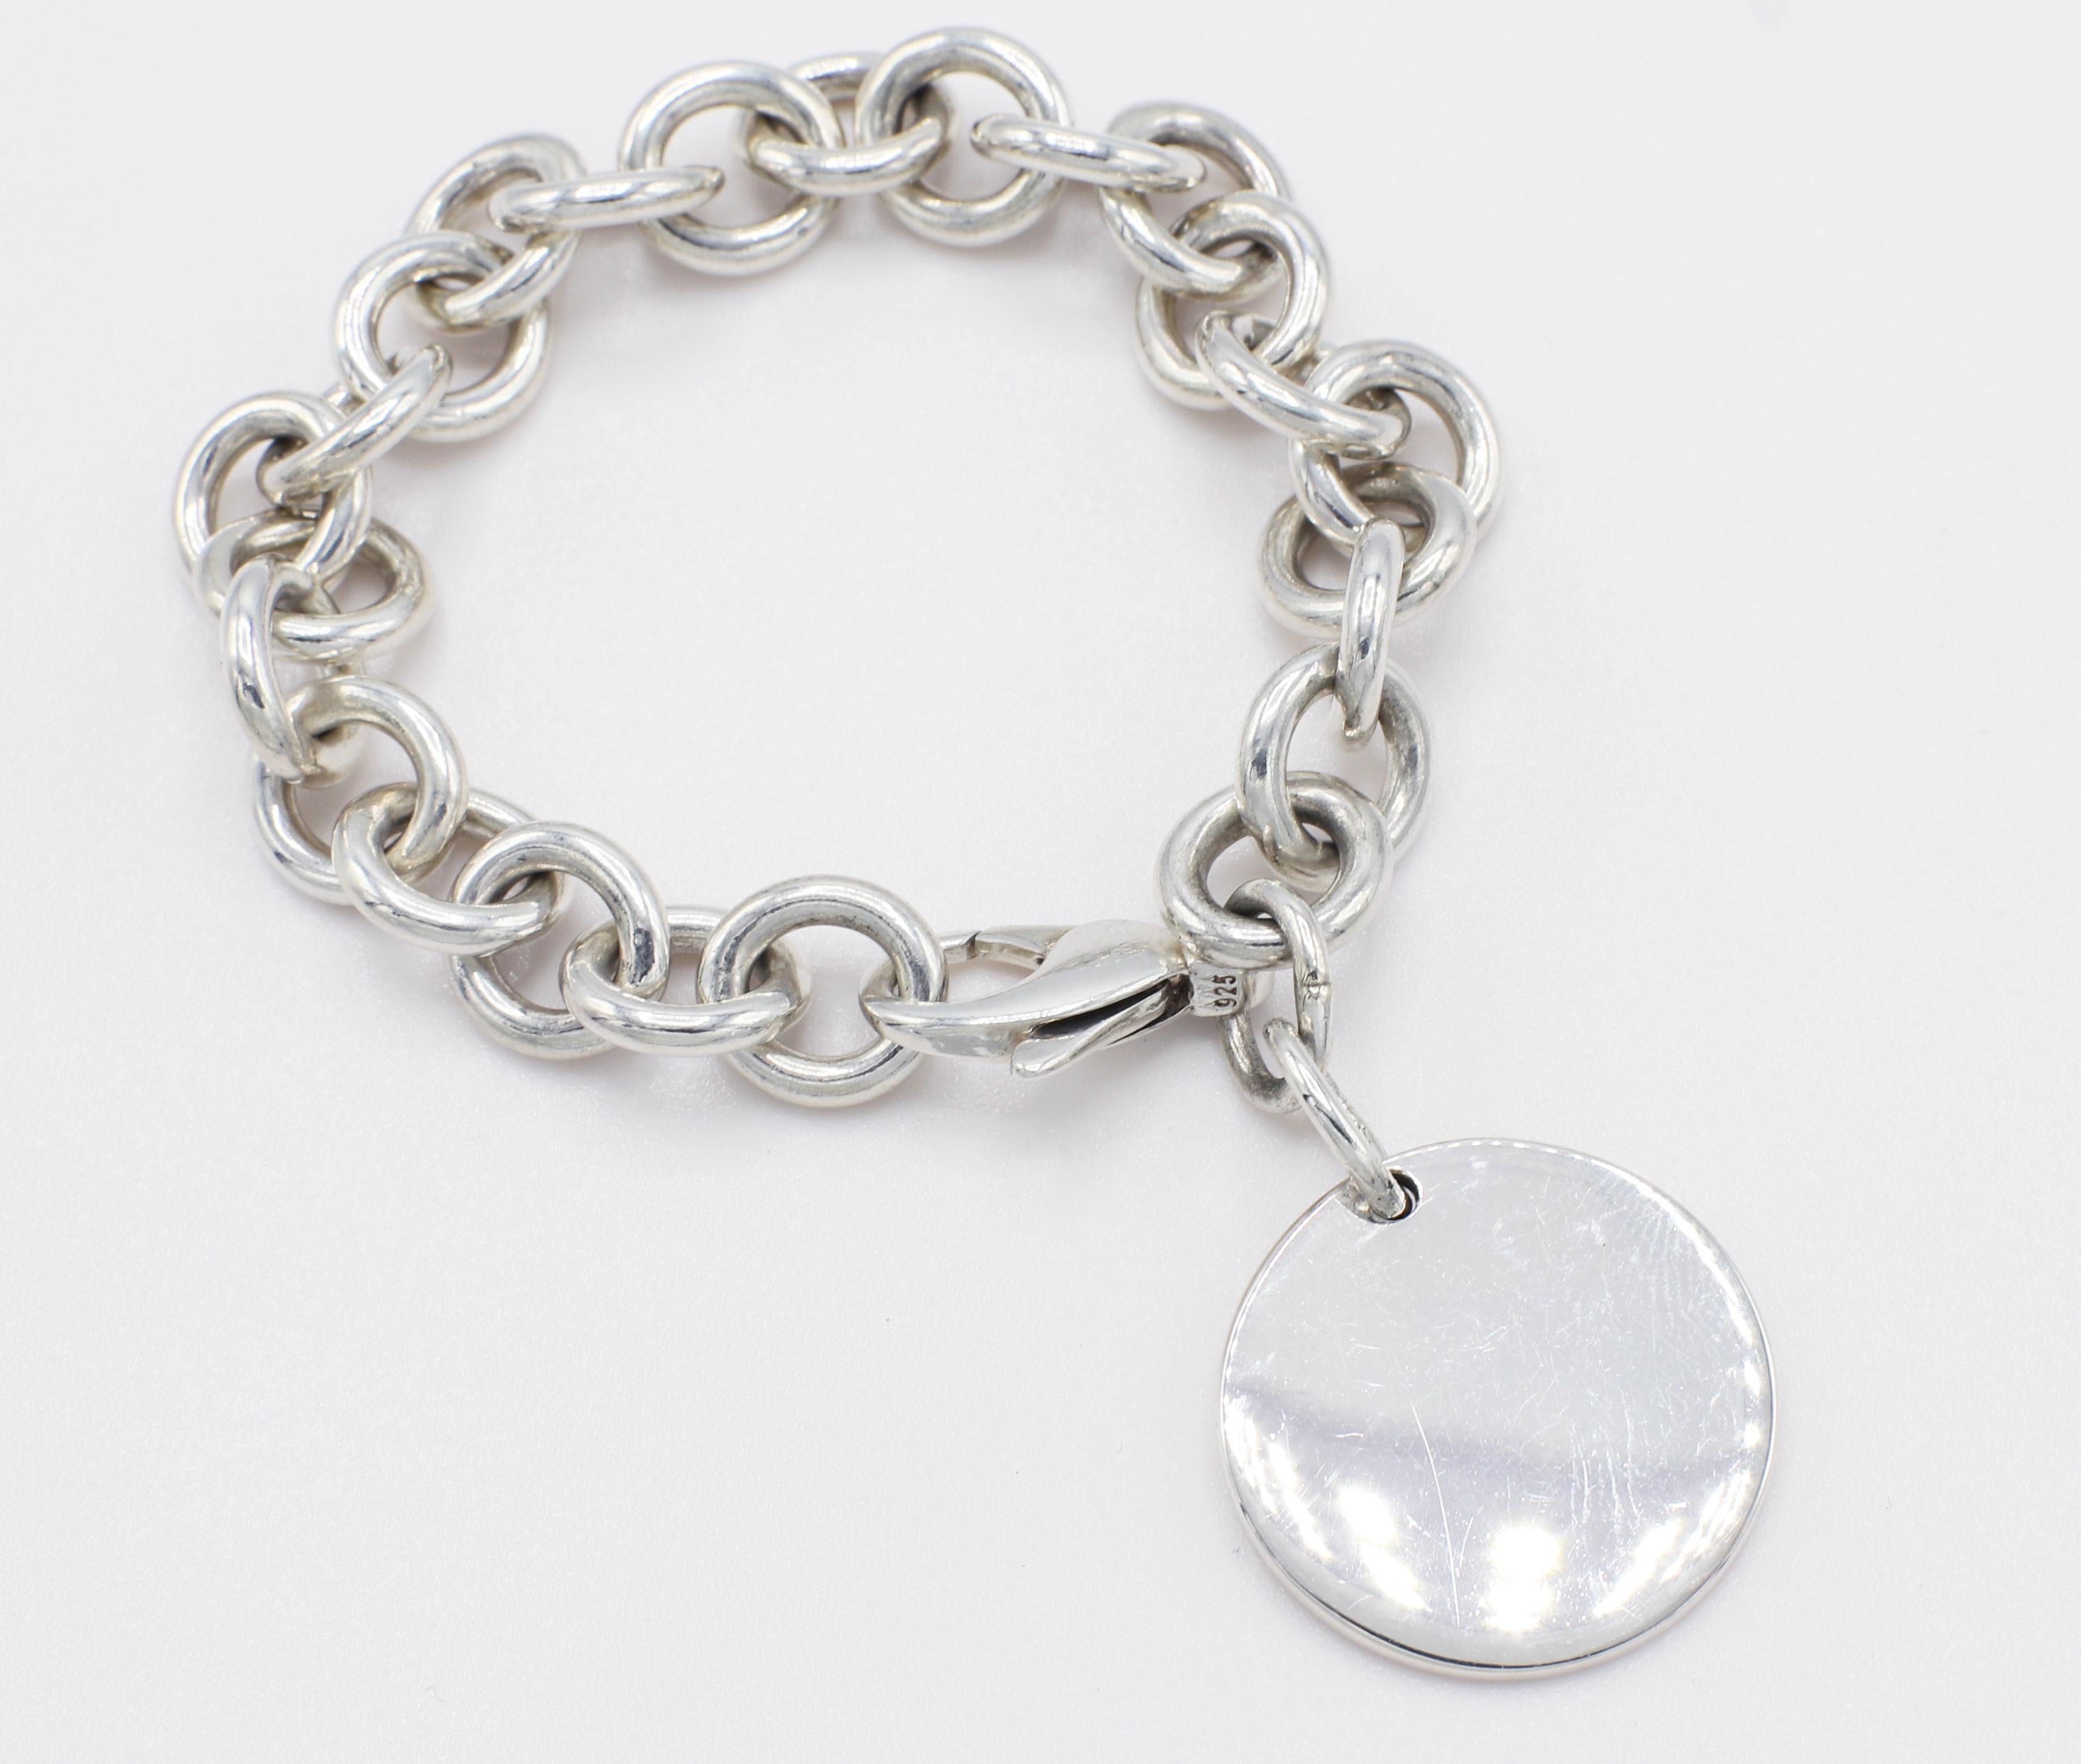 Tiffany & Co. Return to Tiffany Sterling Silver Disc Charm Link Bracelet 
Metal: Sterling silver 925
Weight: 35.49 grams
Length: 6.75 inches
Pendant diameter: 23.5 MM
Signed: Please Return to Tiffany & Co. New York 925

